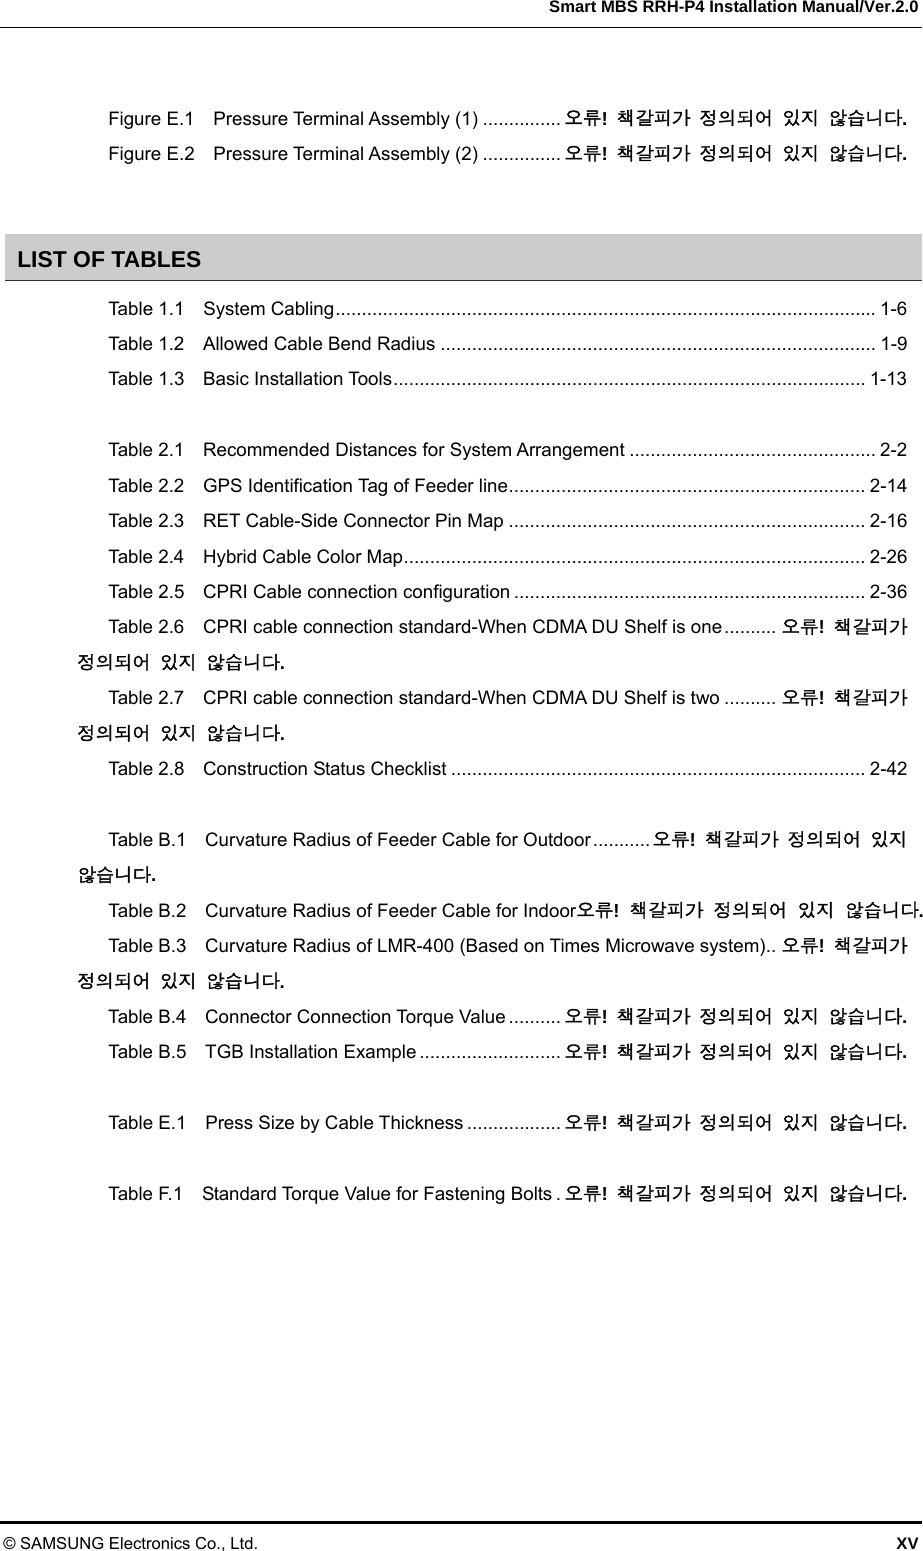  Smart MBS RRH-P4 Installation Manual/Ver.2.0 © SAMSUNG Electronics Co., Ltd.  XV  Figure E.1  Pressure Terminal Assembly (1) ............... 오류!  책갈피가 정의되어 있지 않습니다. Figure E.2  Pressure Terminal Assembly (2) ............... 오류!  책갈피가 정의되어 있지 않습니다.  LIST OF TABLES Table 1.1  System Cabling ....................................................................................................... 1-6 Table 1.2  Allowed Cable Bend Radius ................................................................................... 1-9 Table 1.3  Basic Installation Tools .......................................................................................... 1-13  Table 2.1  Recommended Distances for System Arrangement ............................................... 2-2 Table 2.2  GPS Identification Tag of Feeder line .................................................................... 2-14 Table 2.3  RET Cable-Side Connector Pin Map .................................................................... 2-16 Table 2.4    Hybrid Cable Color Map ........................................................................................ 2-26 Table 2.5  CPRI Cable connection configuration ................................................................... 2-36 Table 2.6  CPRI cable connection standard-When CDMA DU Shelf is one .......... 오류!  책갈피가 정의되어 있지 않습니다. Table 2.7  CPRI cable connection standard-When CDMA DU Shelf is two .......... 오류!  책갈피가 정의되어 있지 않습니다. Table 2.8  Construction Status Checklist ............................................................................... 2-42  Table B.1  Curvature Radius of Feeder Cable for Outdoor ........... 오류!  책갈피가 정의되어 있지 않습니다. Table B.2  Curvature Radius of Feeder Cable for Indoor오류!  책갈피가 정의되어 있지 않습니다. Table B.3    Curvature Radius of LMR-400 (Based on Times Microwave system) .. 오류!  책갈피가 정의되어 있지 않습니다. Table B.4  Connector Connection Torque Value .......... 오류!  책갈피가 정의되어 있지 않습니다. Table B.5  TGB Installation Example ........................... 오류!  책갈피가 정의되어 있지 않습니다.  Table E.1  Press Size by Cable Thickness .................. 오류!  책갈피가 정의되어 있지 않습니다.  Table F.1    Standard Torque Value for Fastening Bolts . 오류!  책갈피가 정의되어 있지 않습니다. 